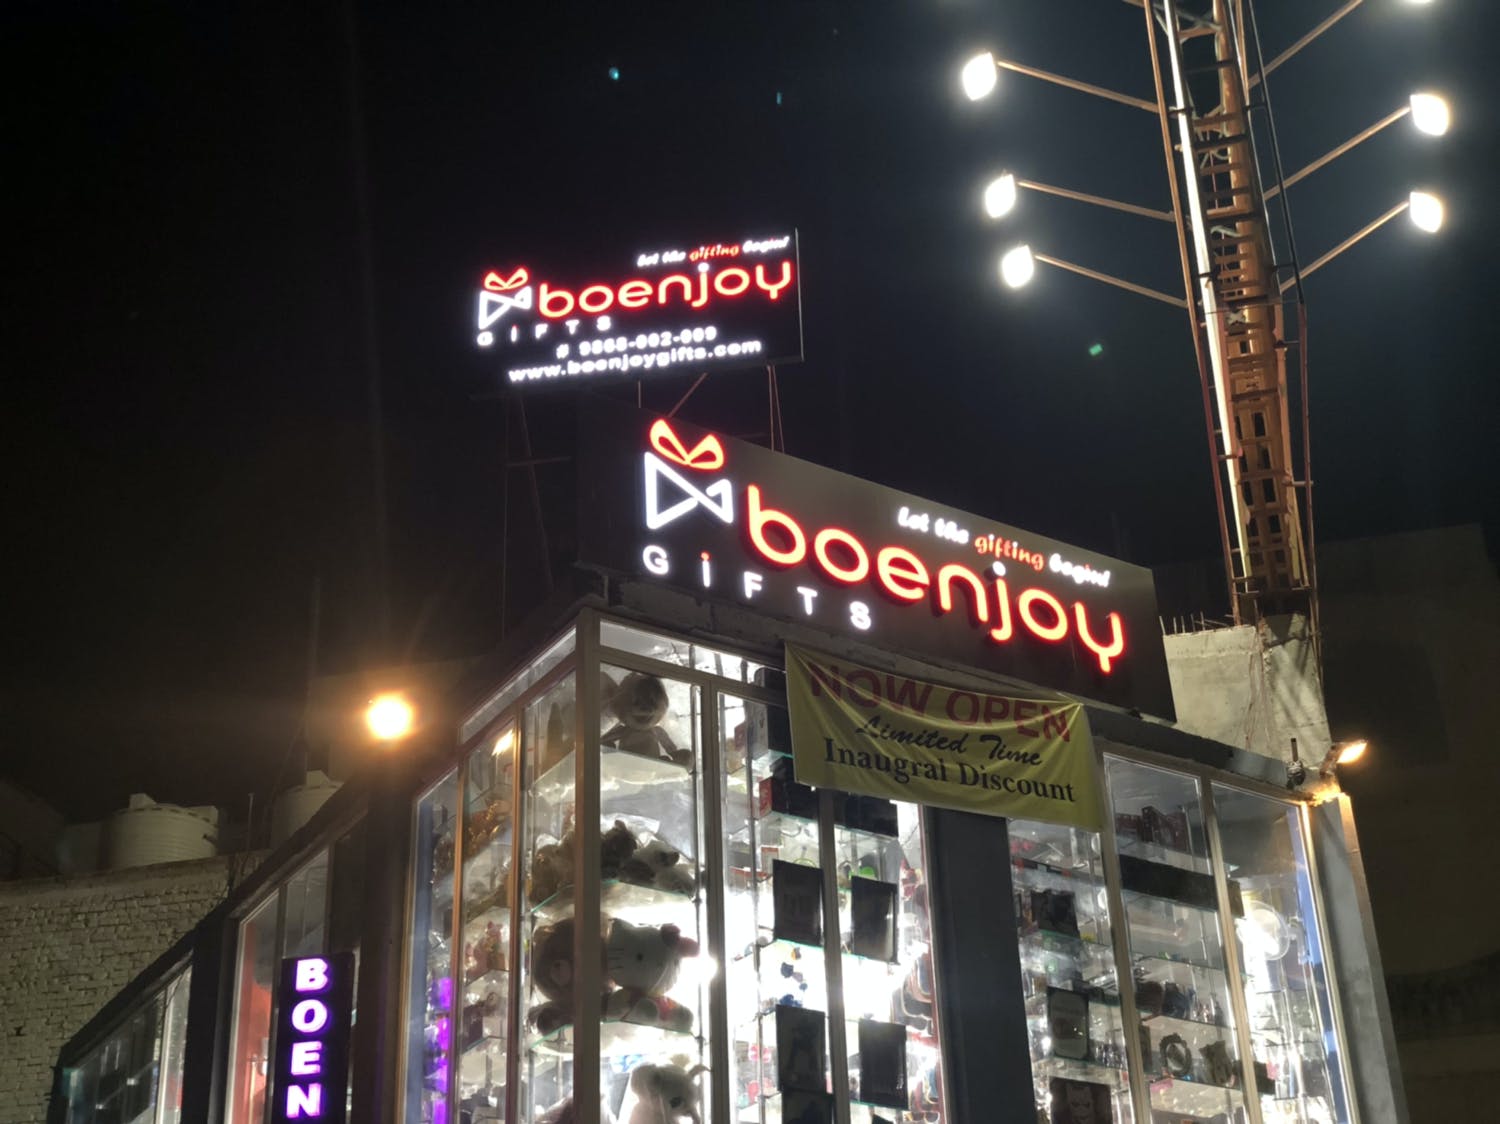 Lighting,Night,Electricity,Electronic signage,Signage,Neon sign,Midnight,Neon,Advertising,Commercial building